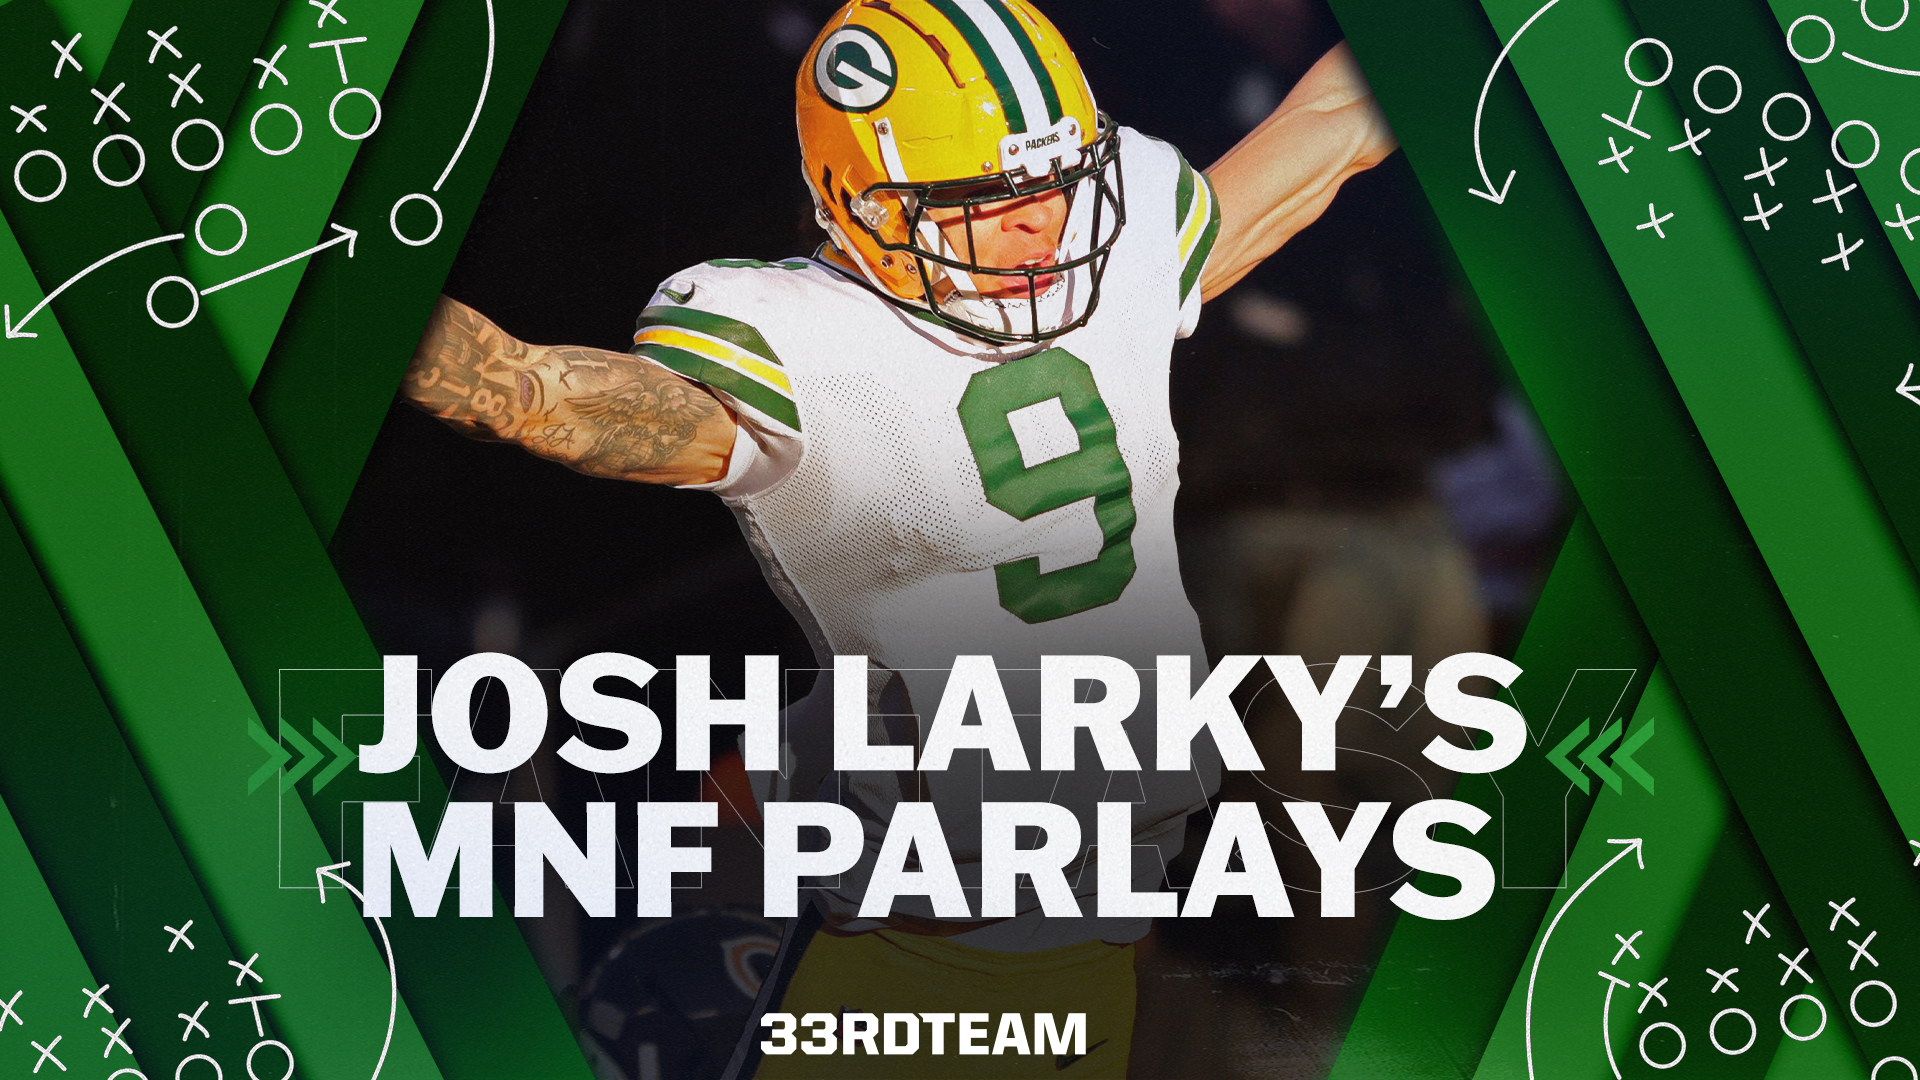 Larky's Monday Night Football Parlays for Rams vs. Packers